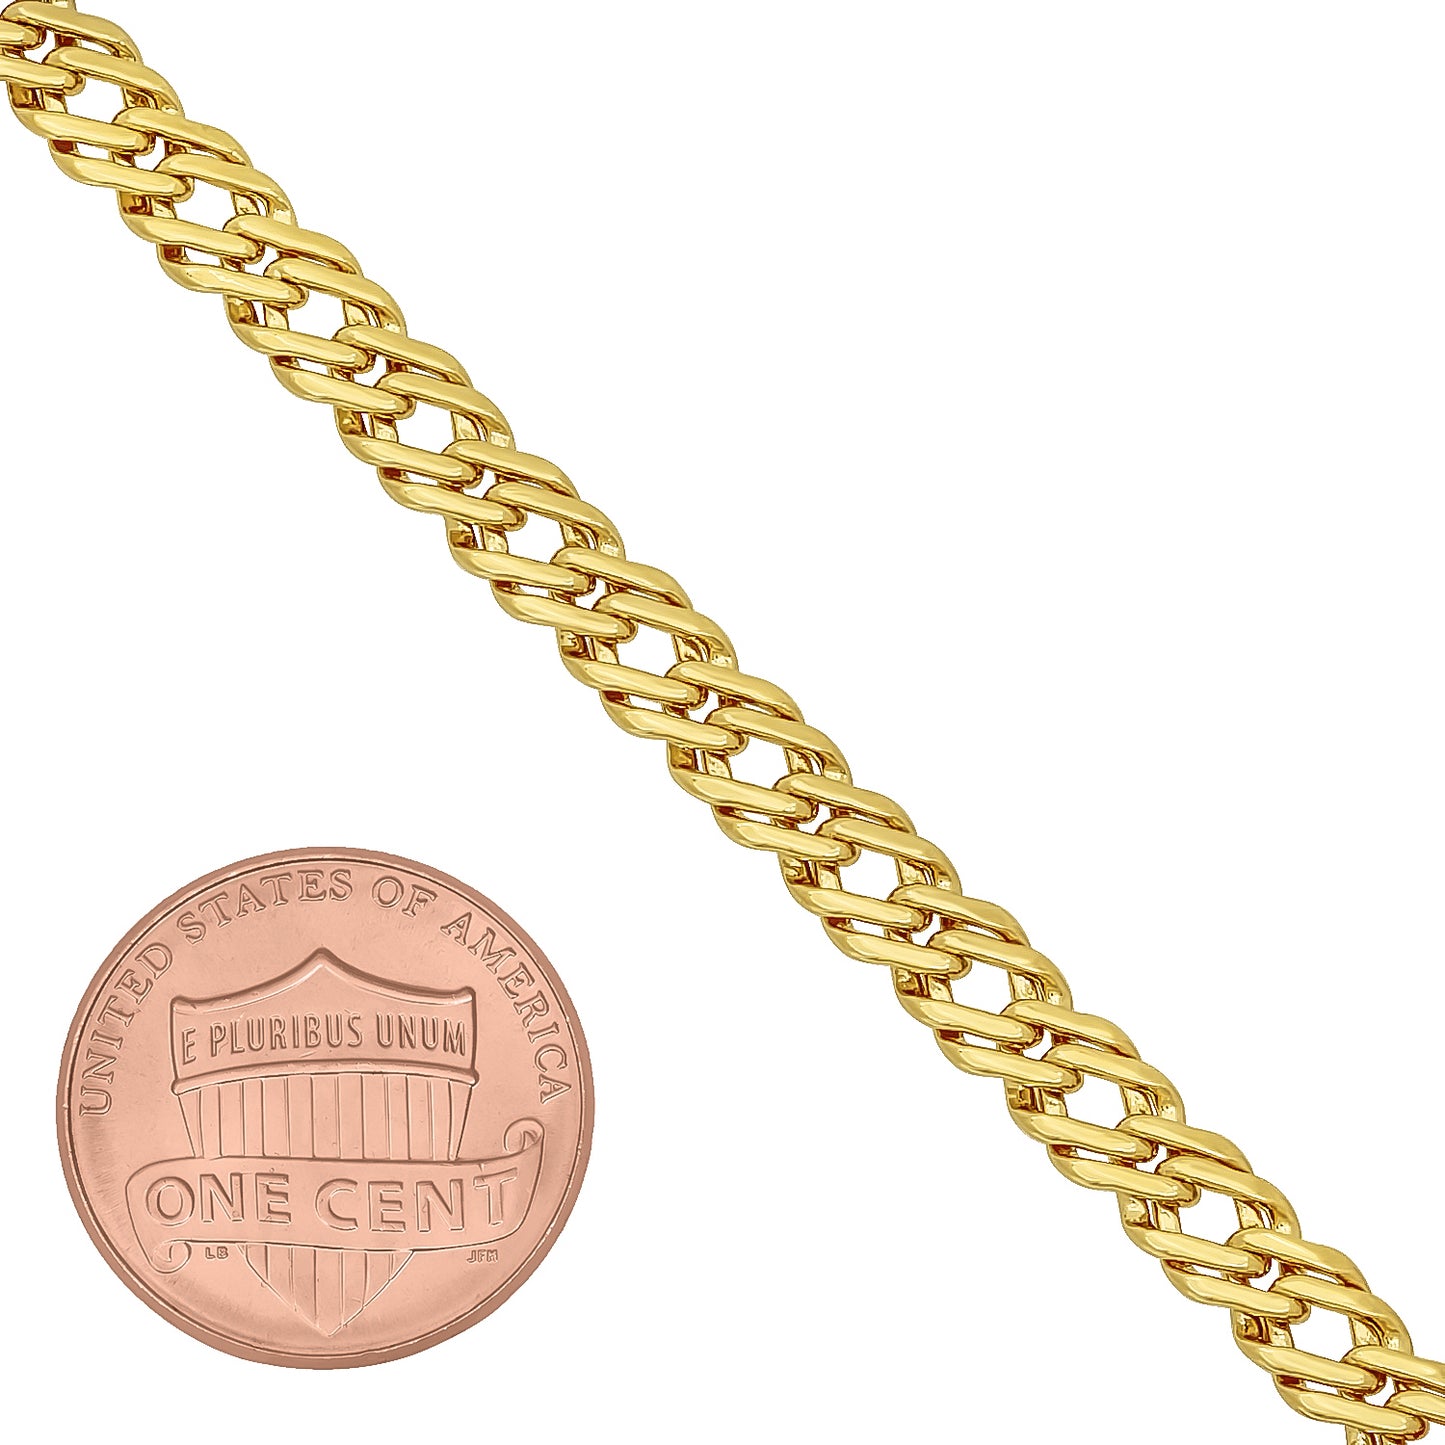 5mm 14k Yellow Gold Plated Cable Venetian Chain Bracelet (SKU: GL-061AB)